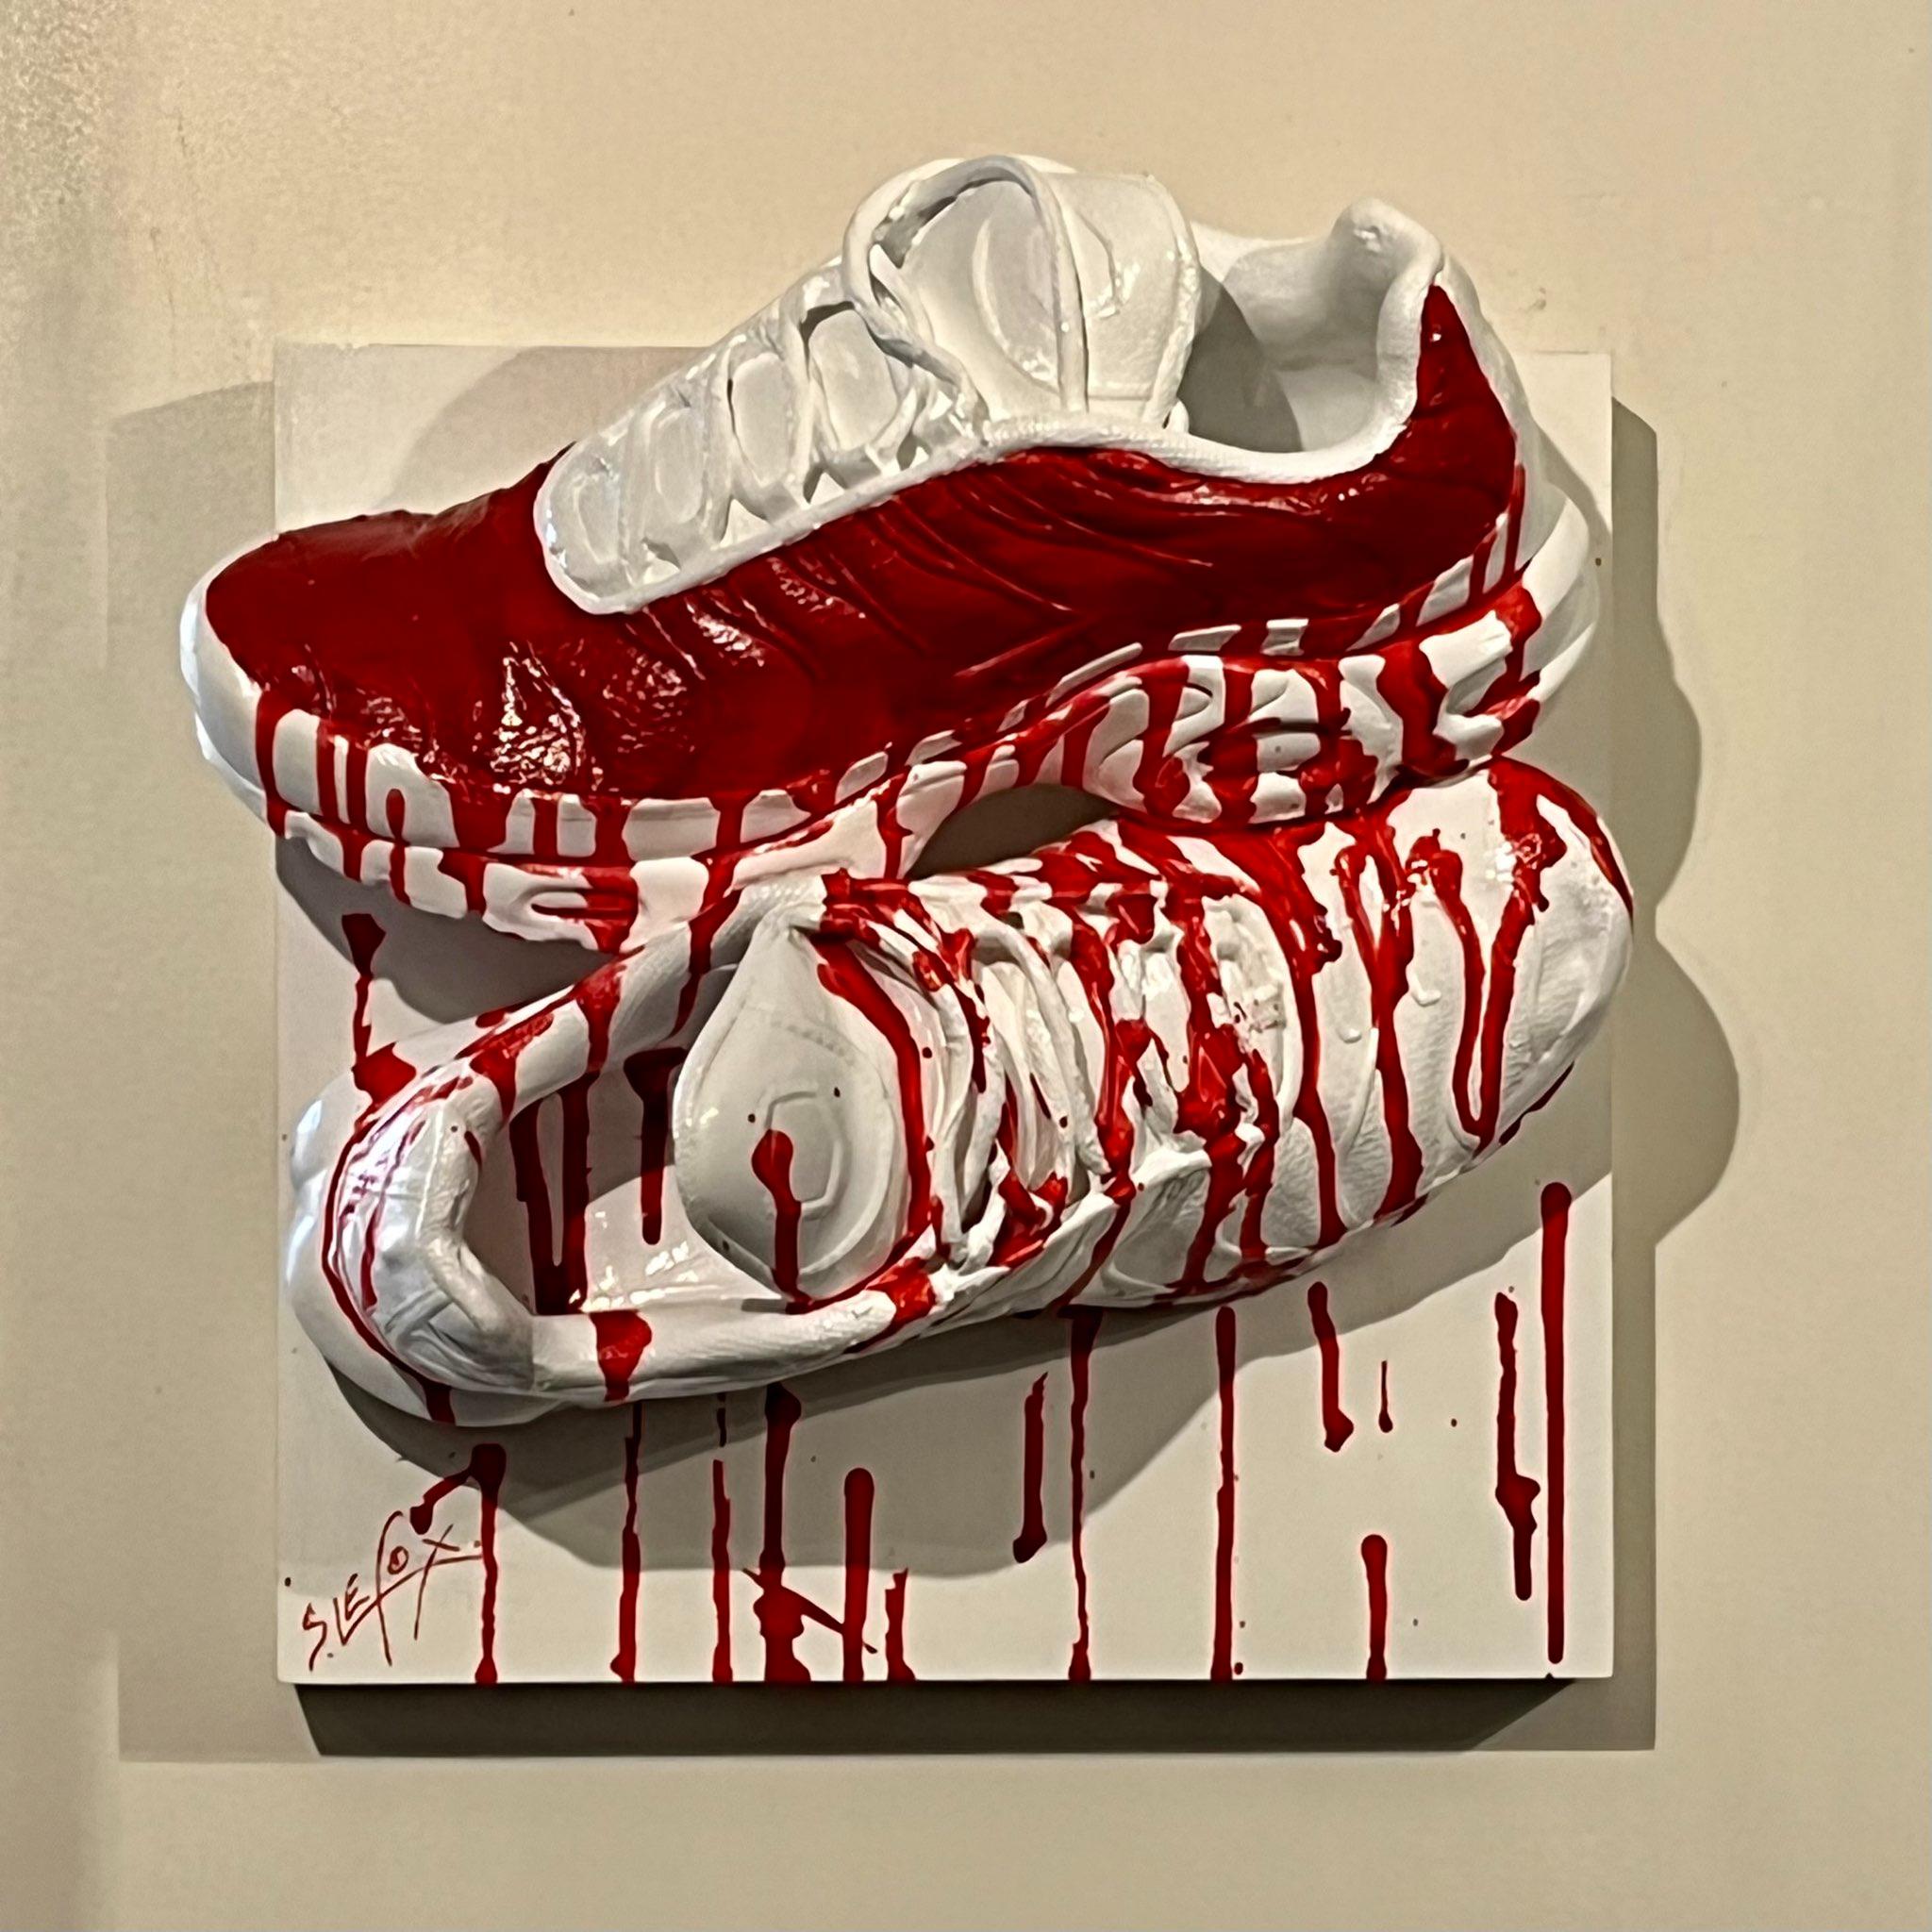 BLOODY TUNED</br>Acrylic on Nike Air Max Tuned, wooden box 30 X 30 X 20 SBG